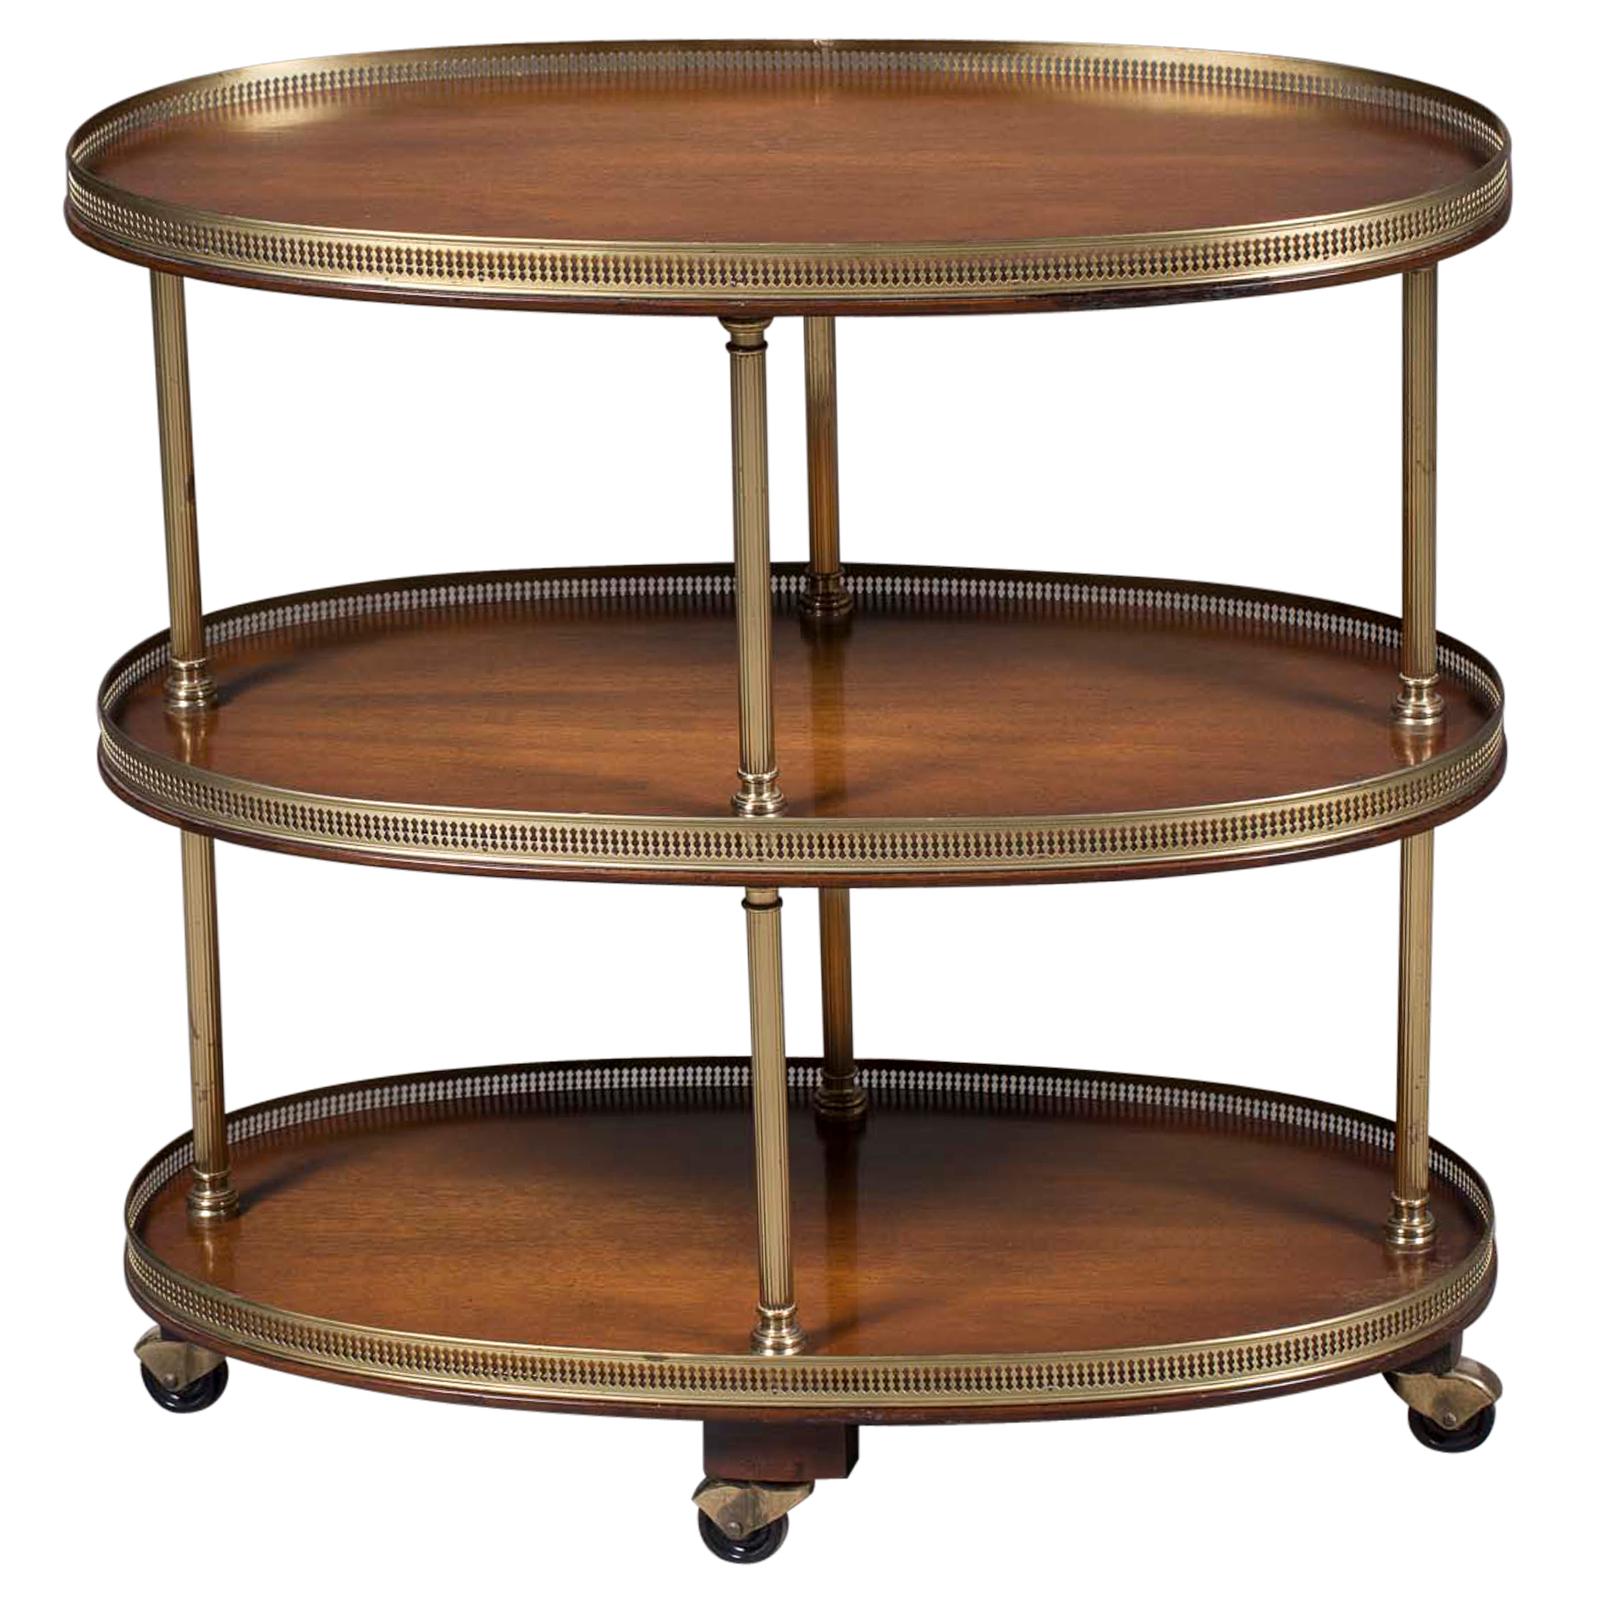 Vintage French Oval Mahogany Brass Serving Bar Cart on Casters, circa 1970